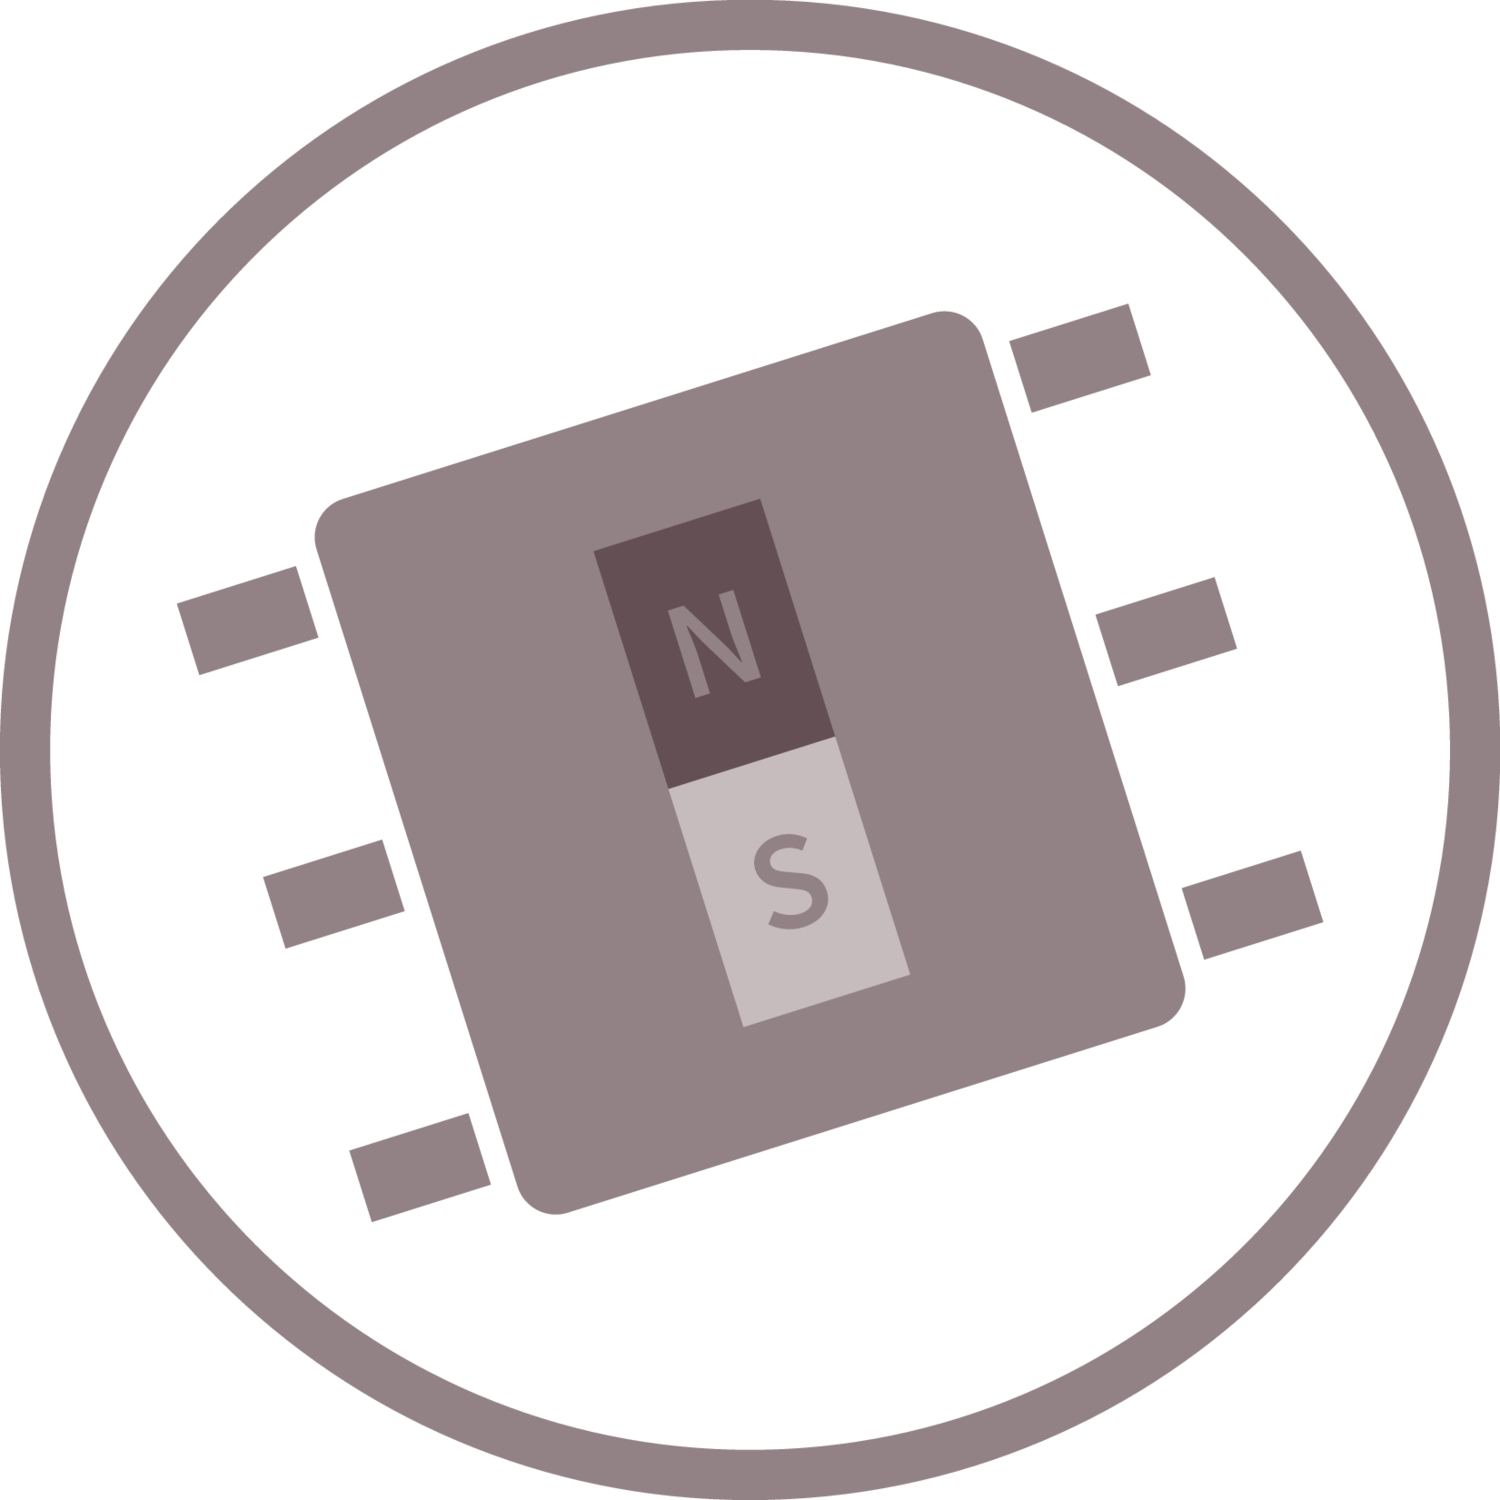 lowres-INFIN_Icon_Magnetic_Sensor_02.eps.png